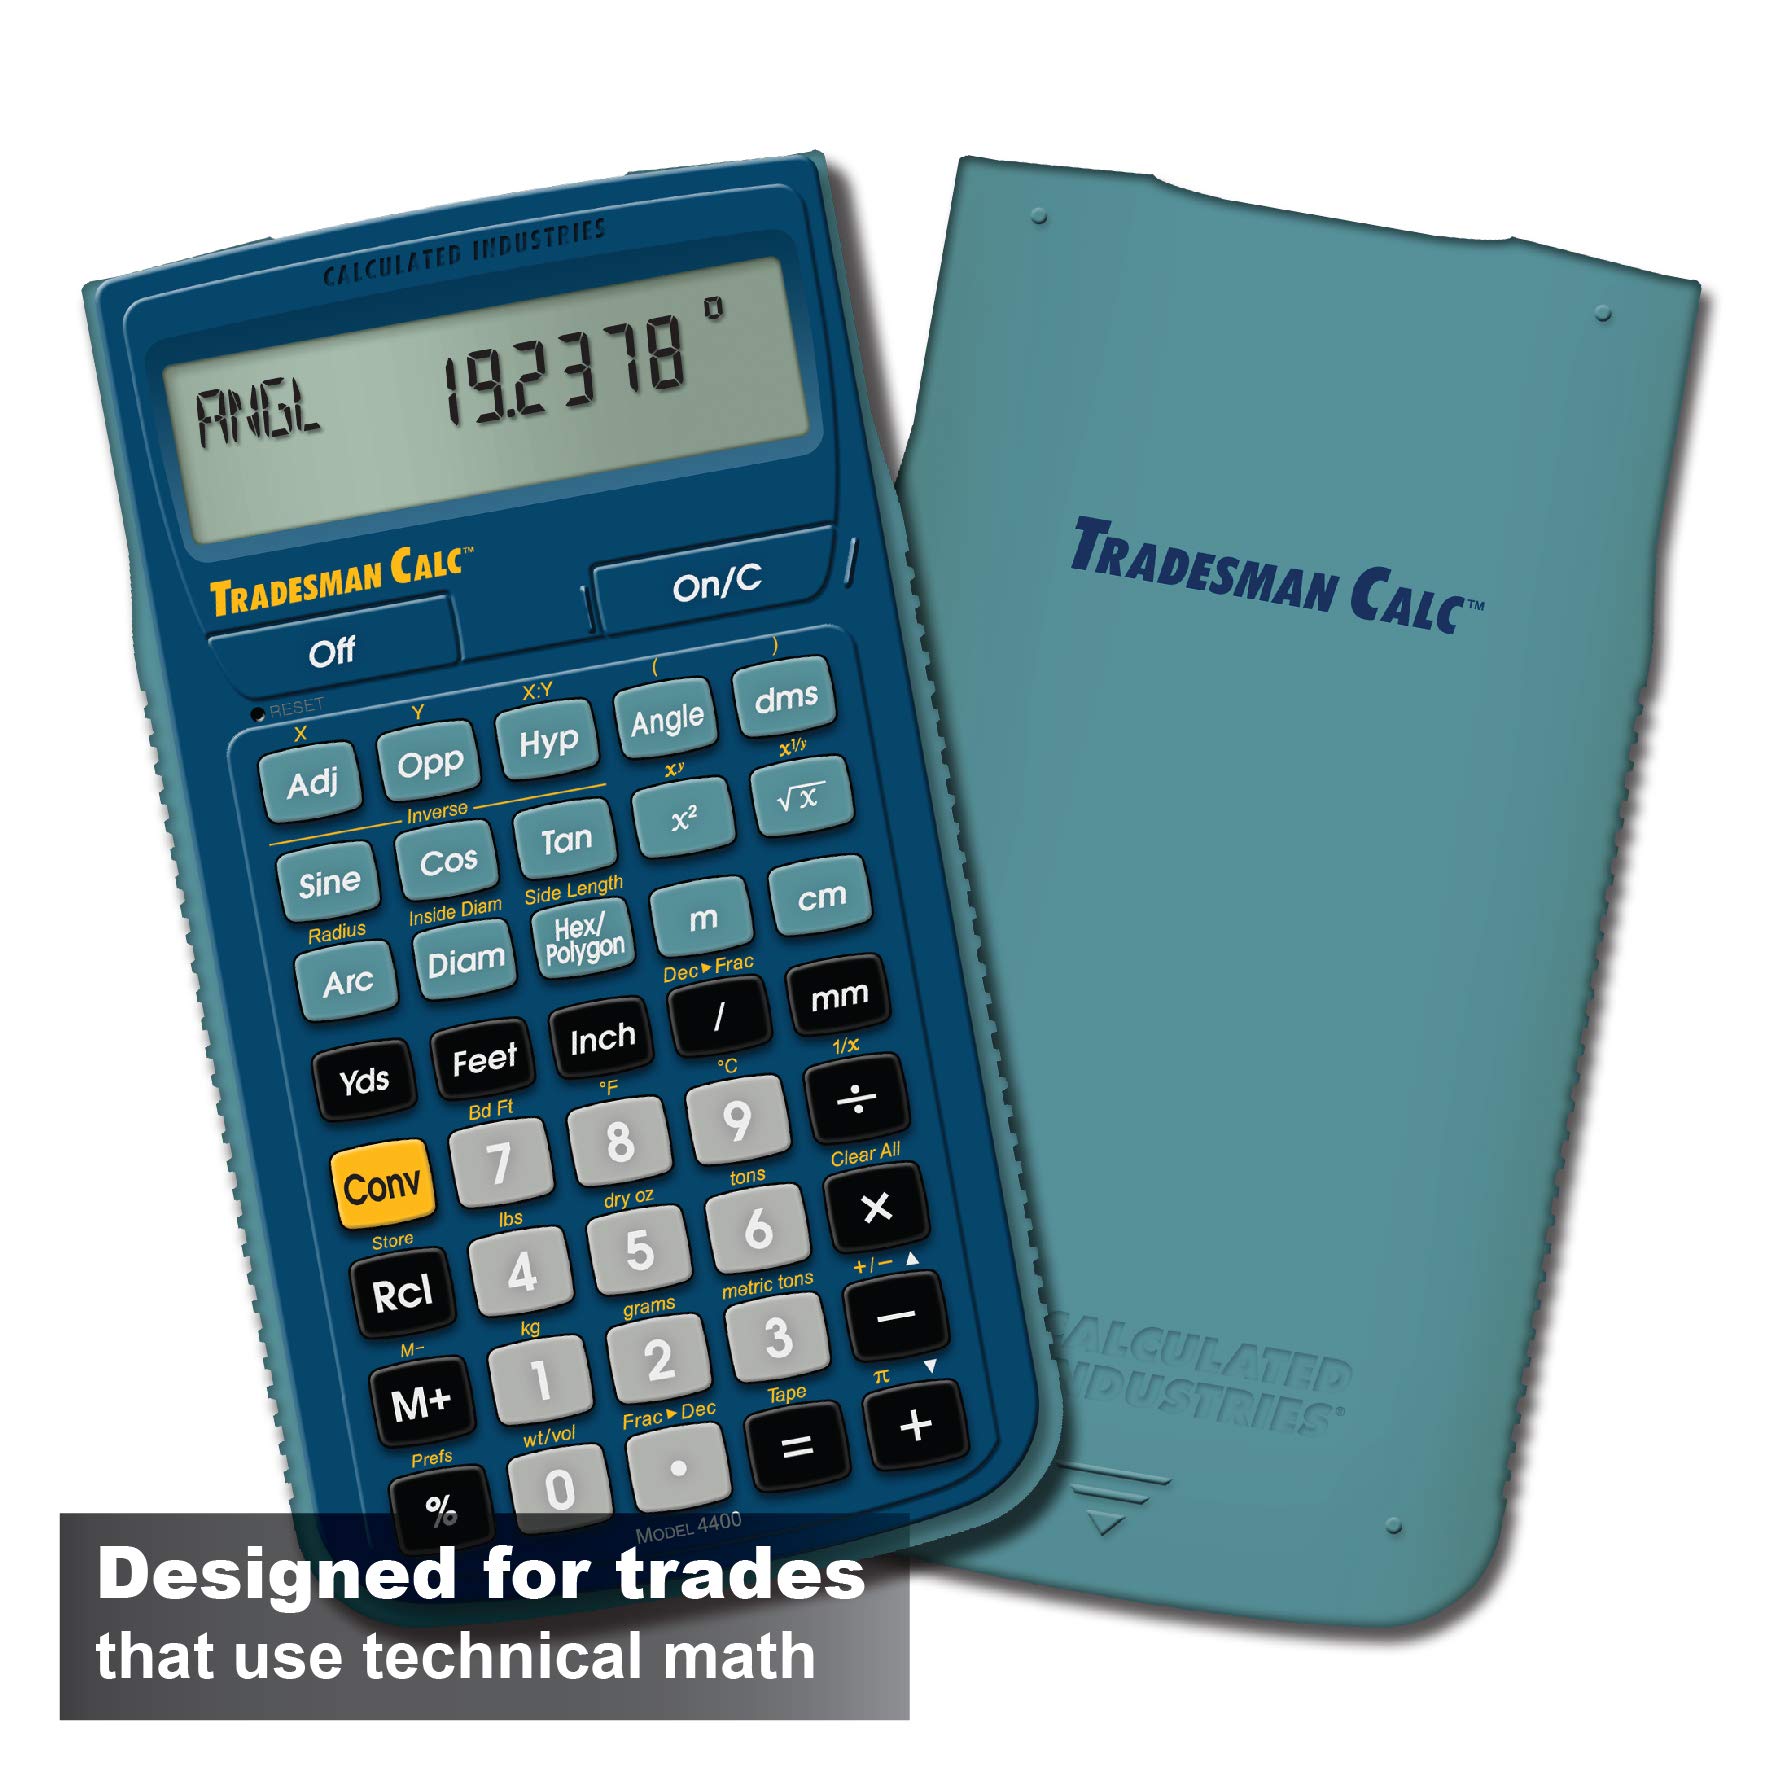 Calculated Industries 4400 TradesmanCalc Technical Trades Dimensional Trigonometry and Geometry Math and Conversion Calculator Tool for Tech Students, Welders, Metal Fabricators, Engineers, Draftsmen Small